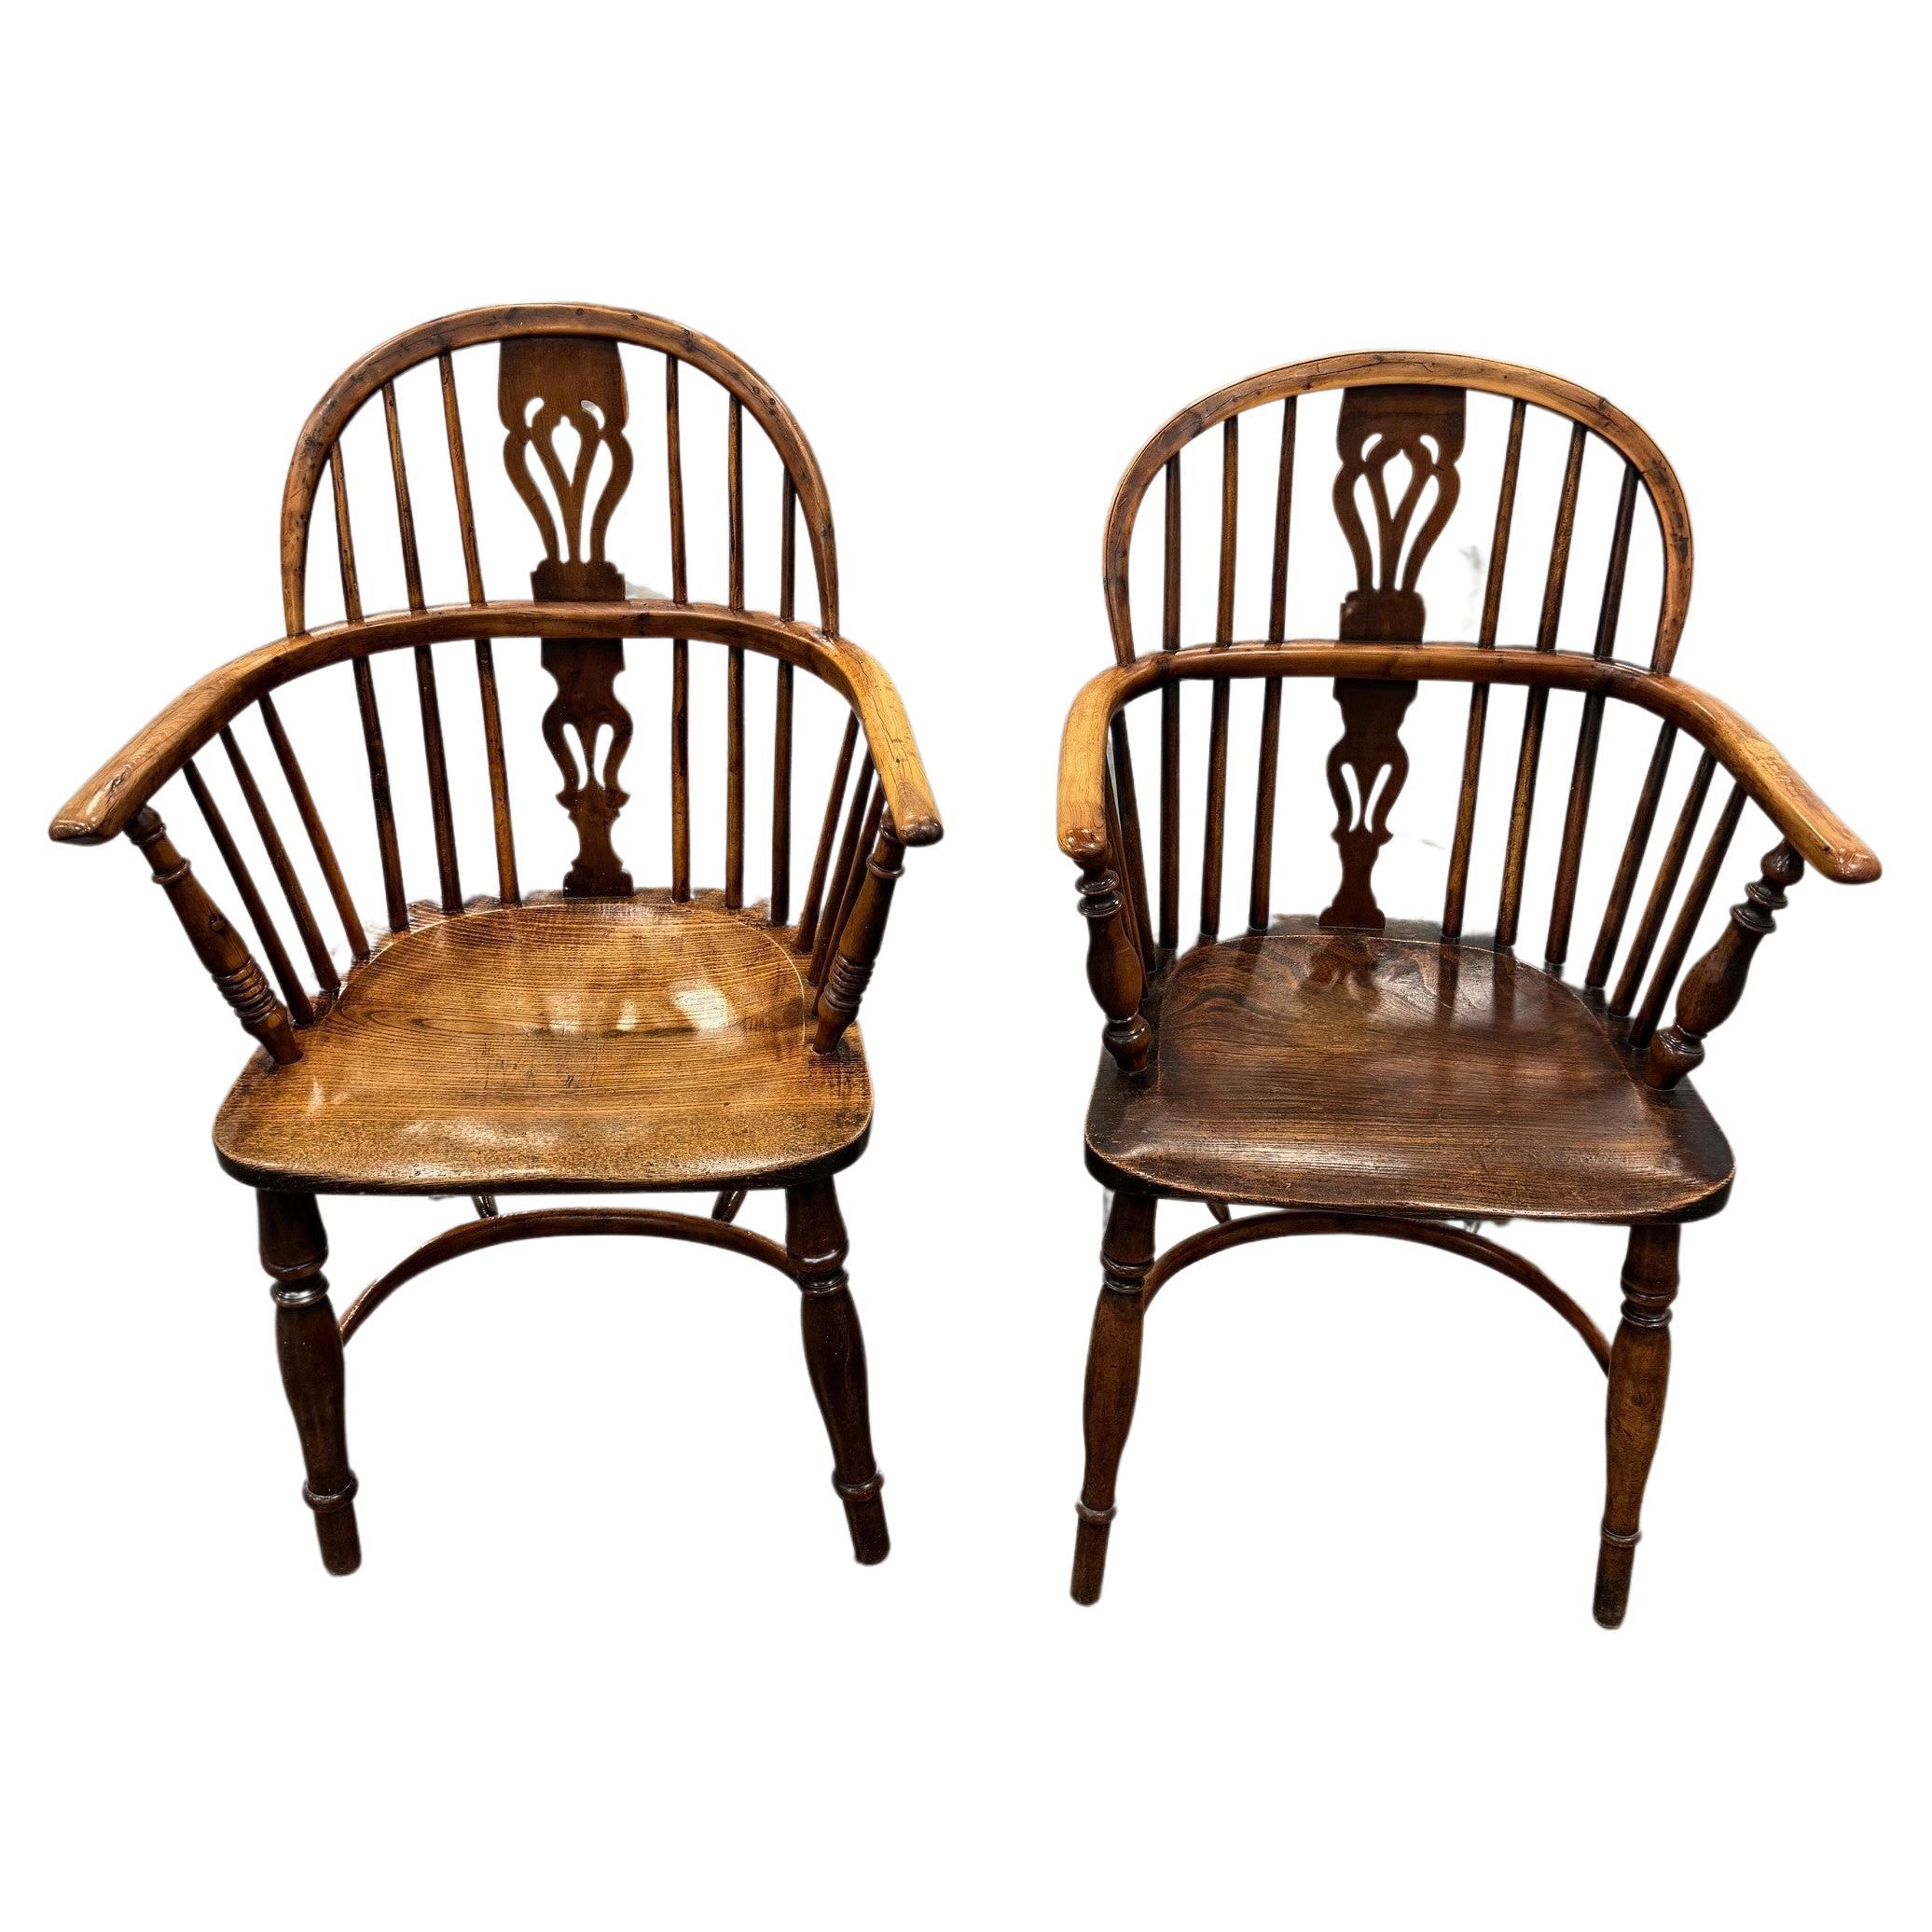 Matched Set of Two Early Low back Yew Wood Windsor Chairs